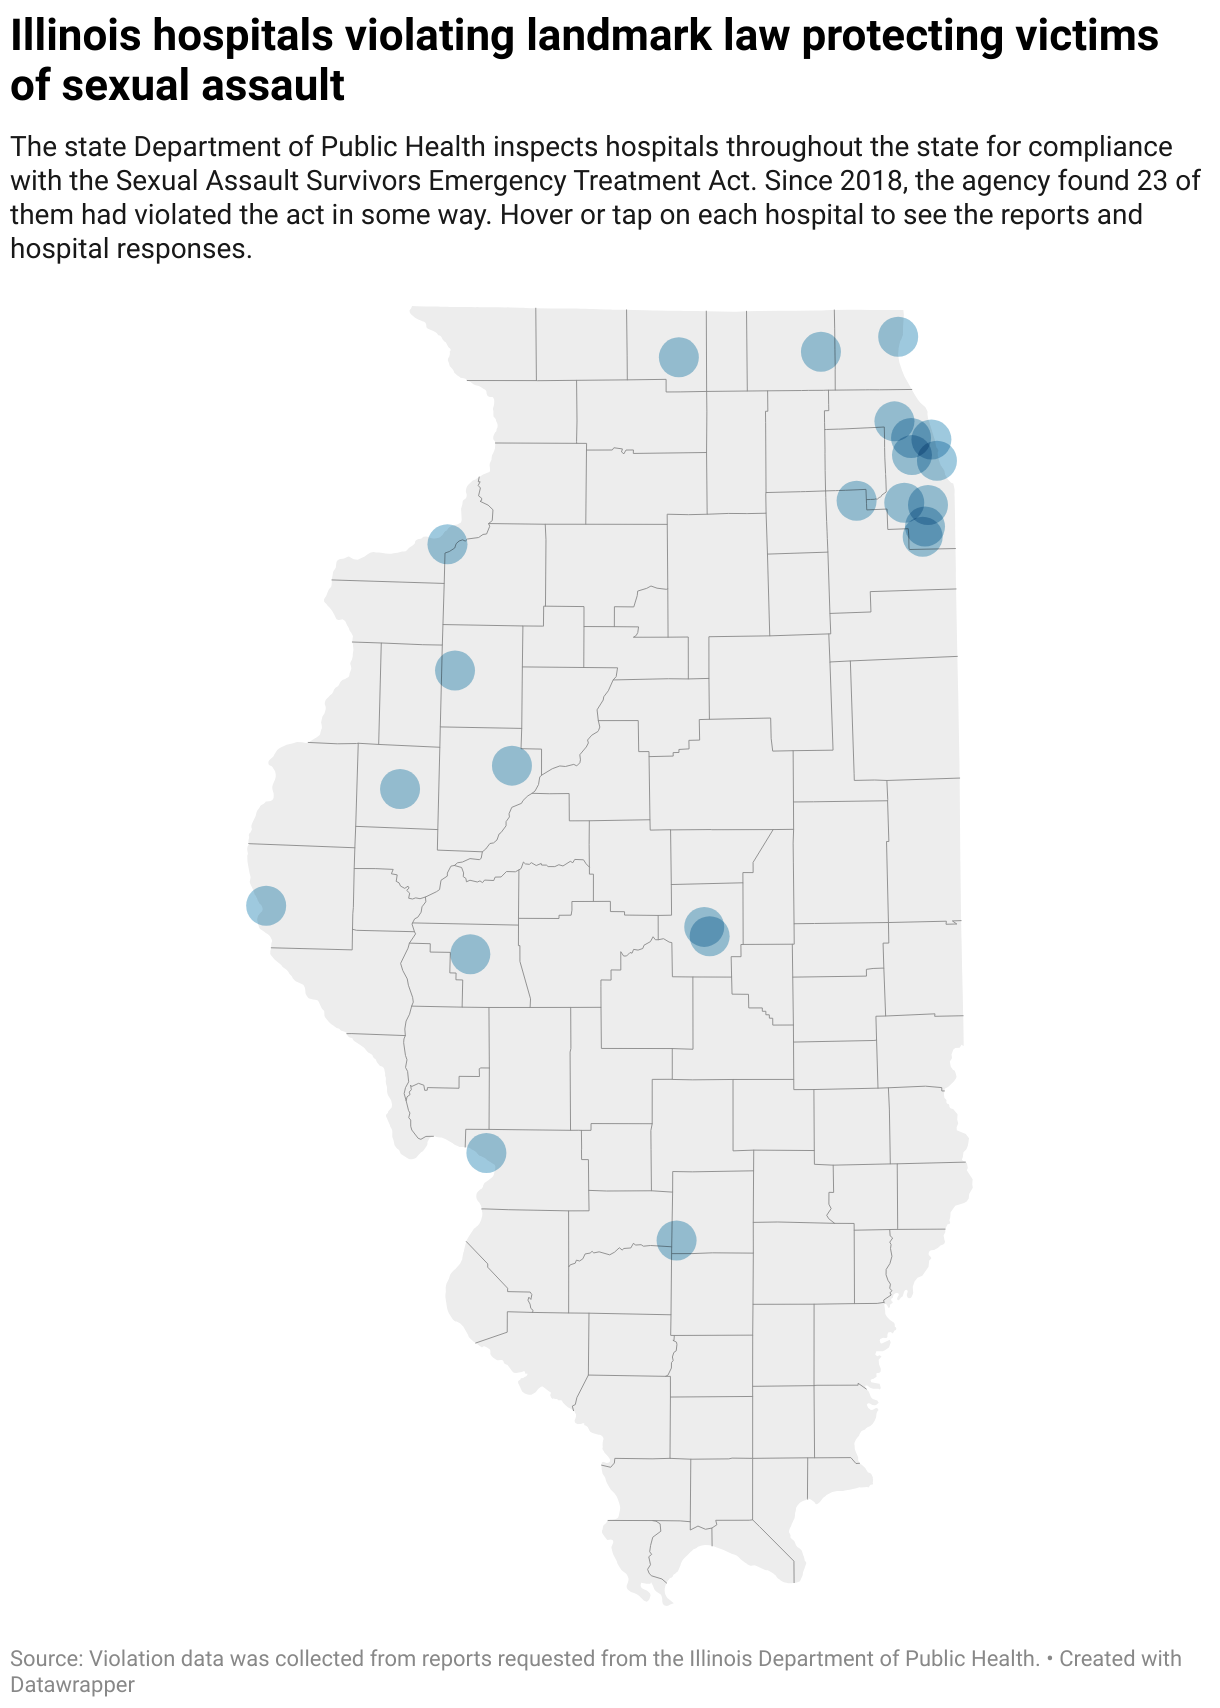 A map of Illinois displays 23 dots representing hospitals that have violated the Sexual Assault Survivors Emergency Treatment Act since 2018. About half are in the Chicago area, while the rest are spread throughout the state.